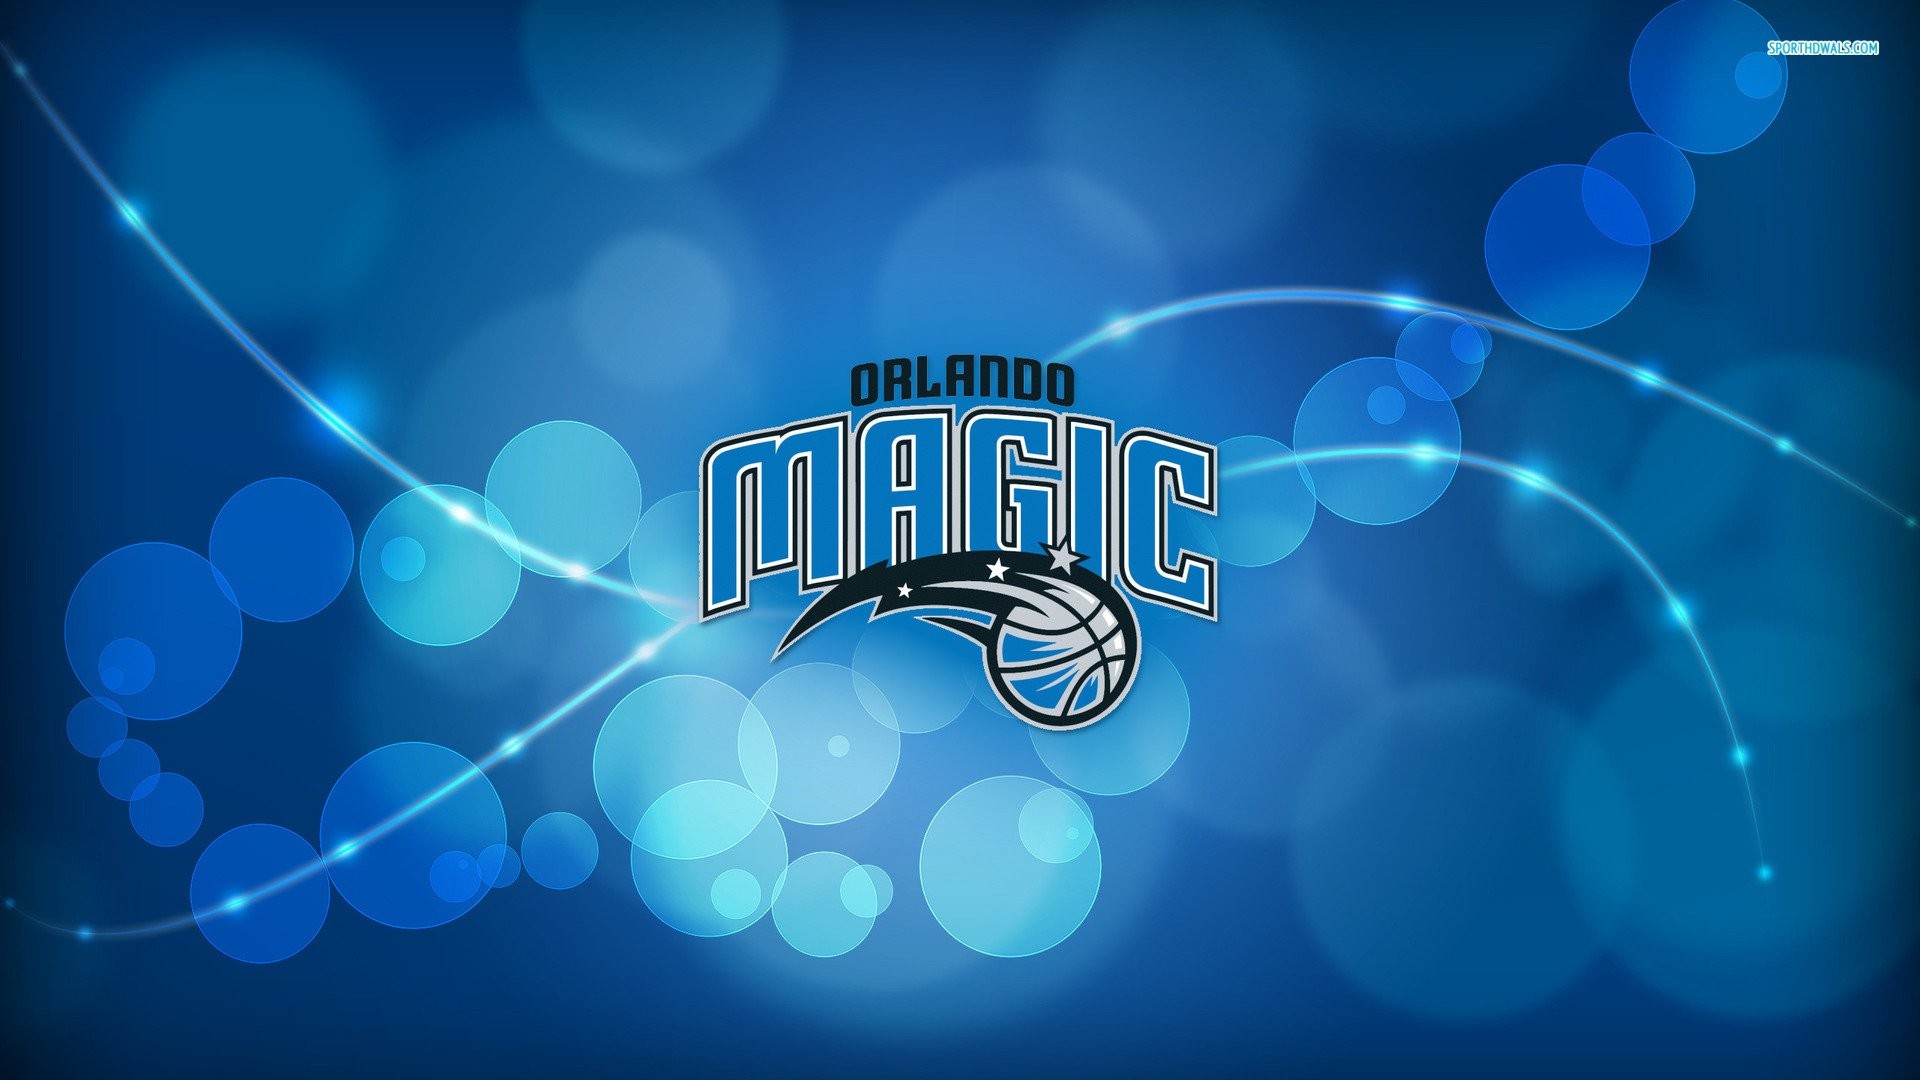 HD Desktop Wallpaper Orlando Magic NBA with high-resolution 1920x1080 pixel. You can use this wallpaper for your Desktop Computer Backgrounds, Windows or Mac Screensavers, iPhone Lock screen, Tablet or Android and another Mobile Phone device